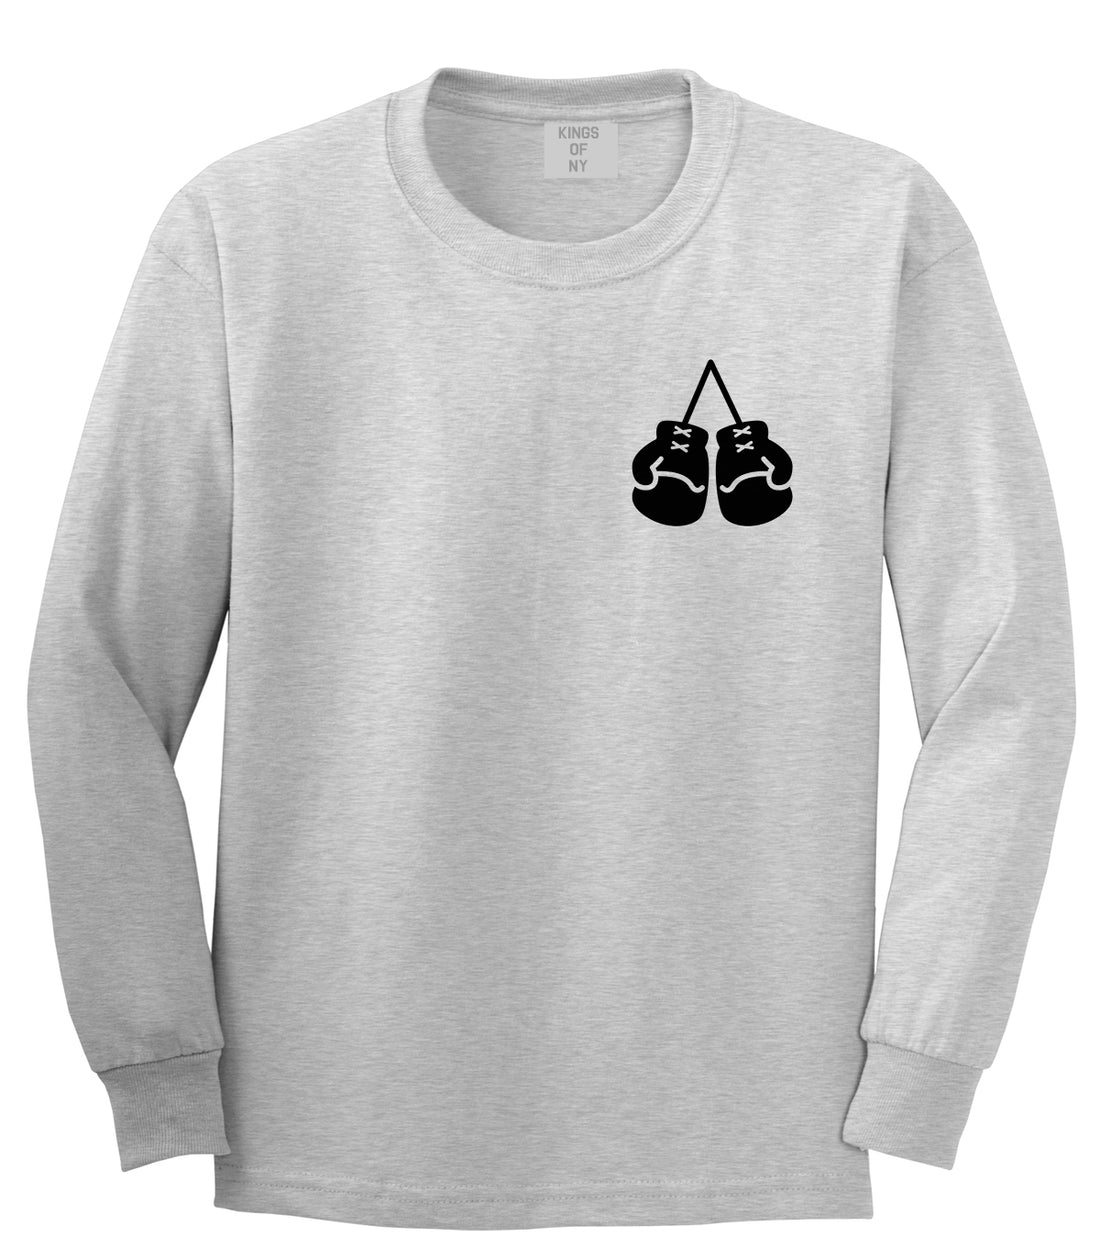 Boxing Gloves Chest Grey Long Sleeve T-Shirt by Kings Of NY